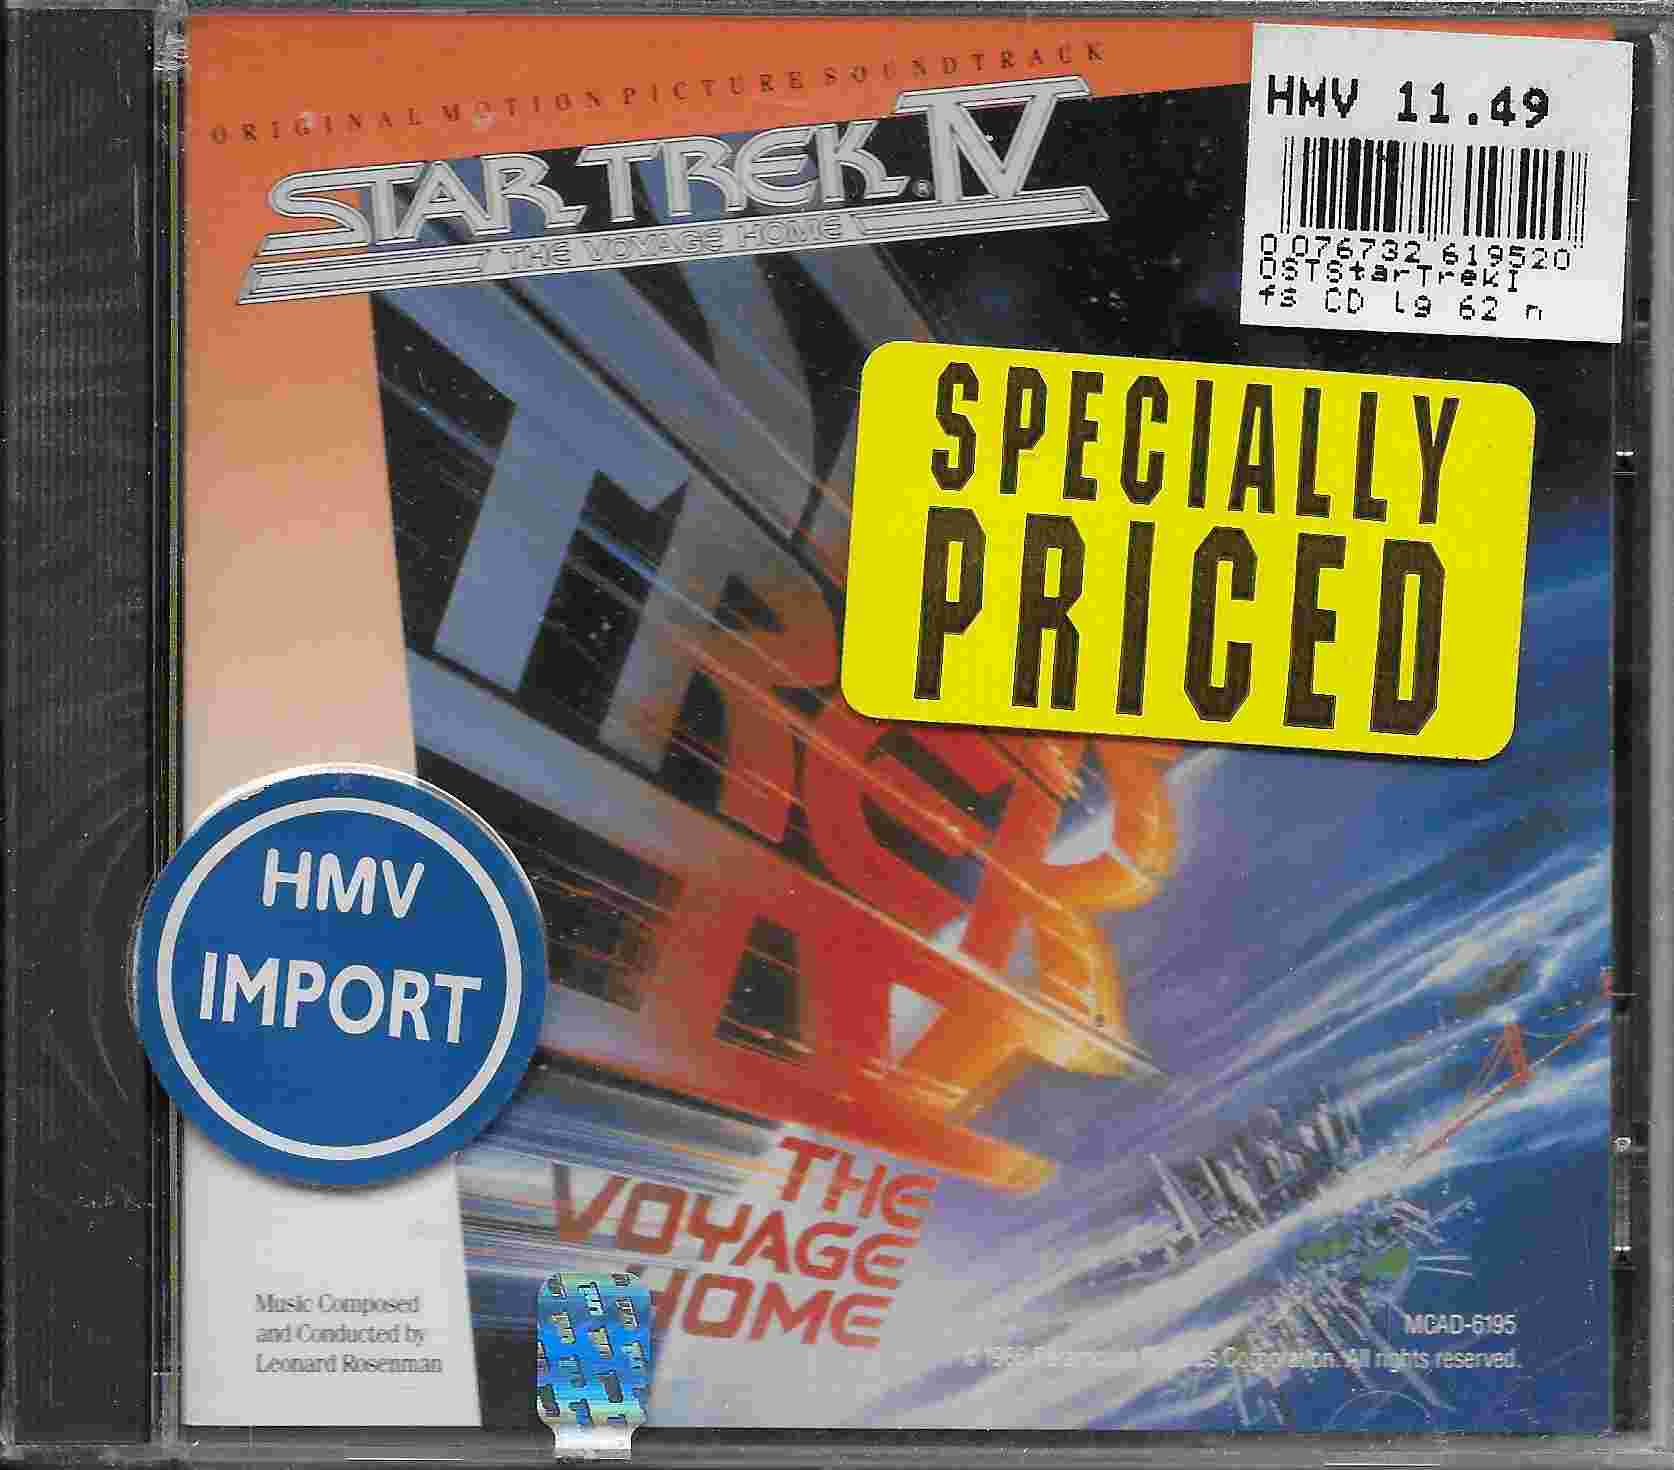 Picture of Star trek IV - The voyage home by artist Unknown from the BBC cds - Records and Tapes library